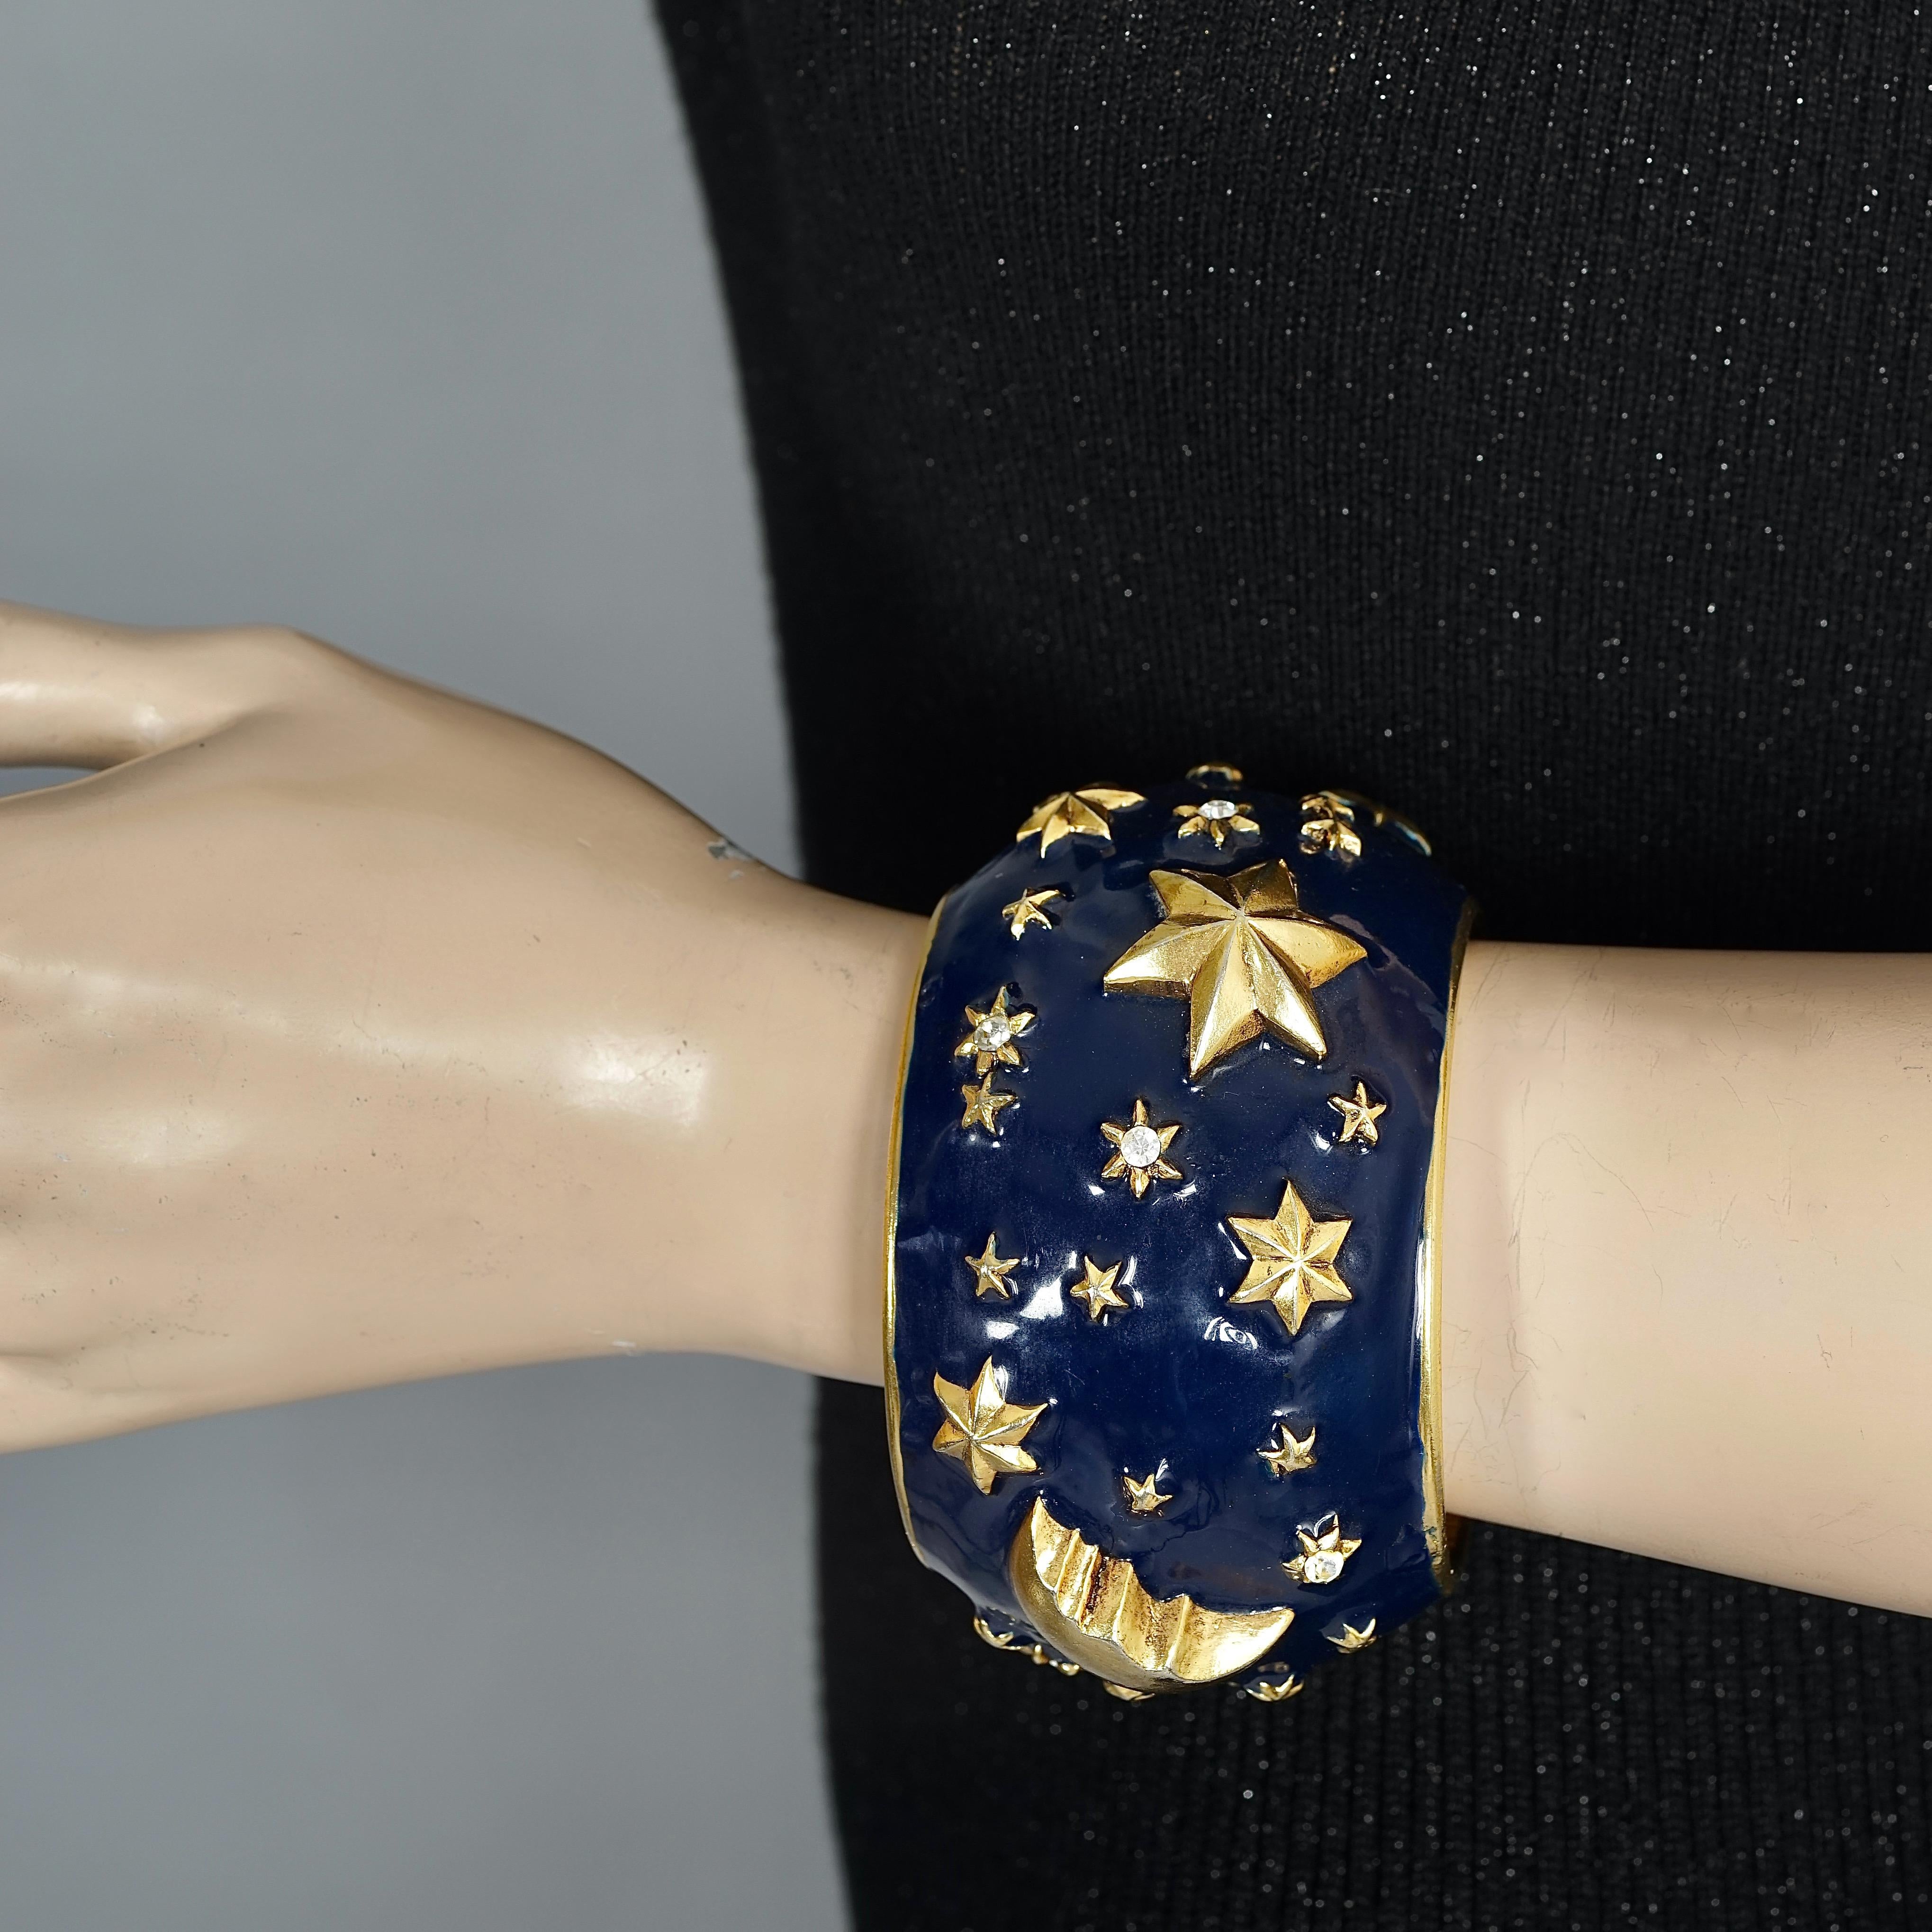 Vintage CHANTAL THOMASS Star Moon Enamel Cuff Bracelet

Measurements:
Height: 2.12 inches (5.4 cm)
Inner Circumference: 7.67 inches (19.5 cm)

Features:
- 100% Authentic CHANTAL THOMASS.
- Moon and stars blue enamel cuff bracelet.
- Gold tone